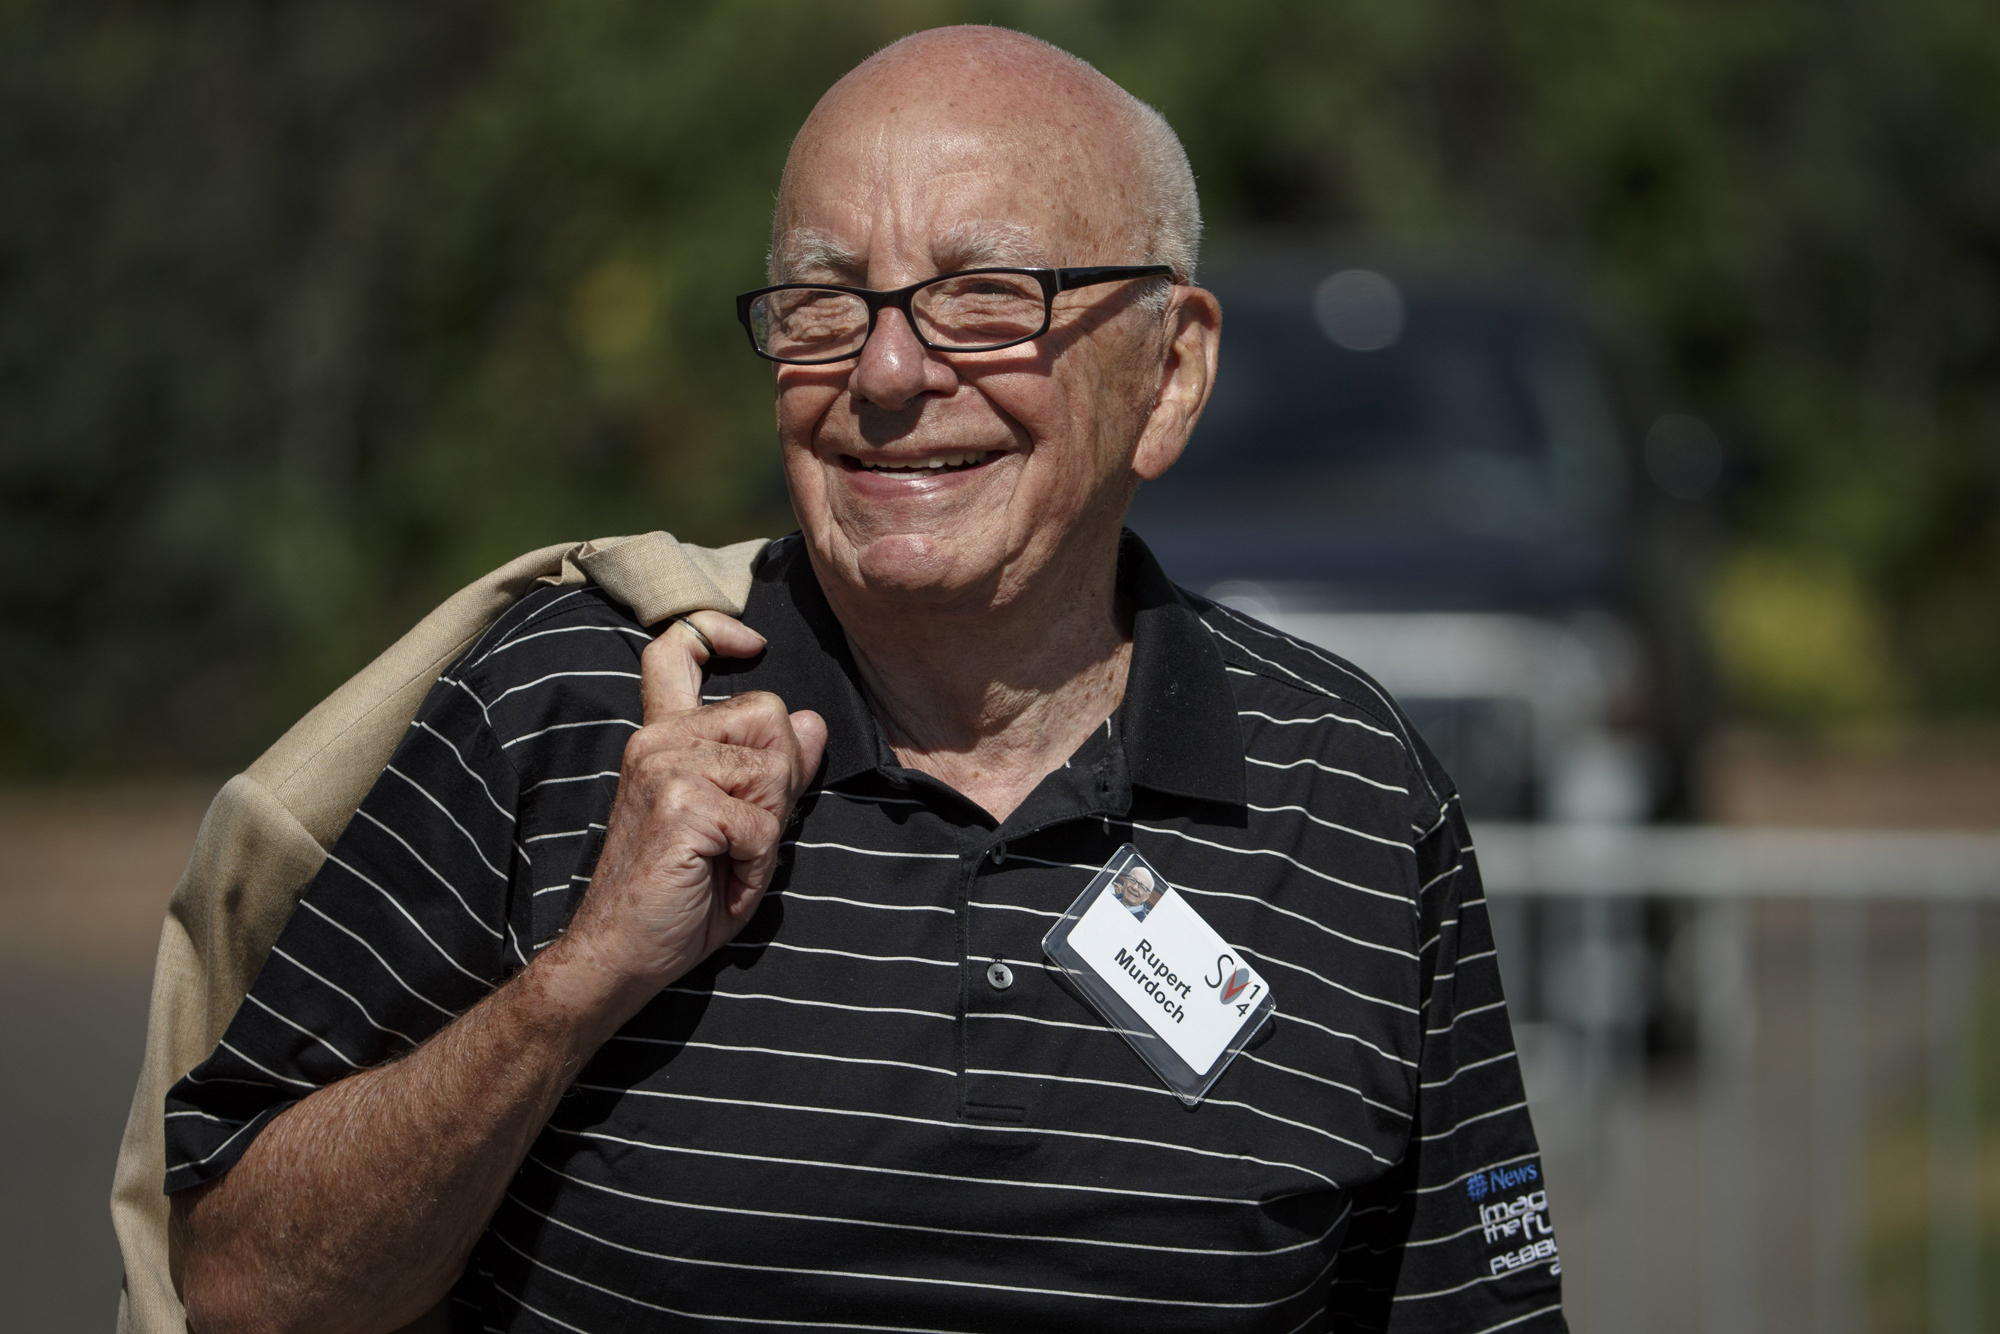 Rupert Murdoch, Executive Chairman of News Corp. and Chairman and CEO of 21st Century Fox, attends the Allen & Co. 32nd annual Media and Technology Conference, in Sun Valley, Idaho, July 10, 2014.